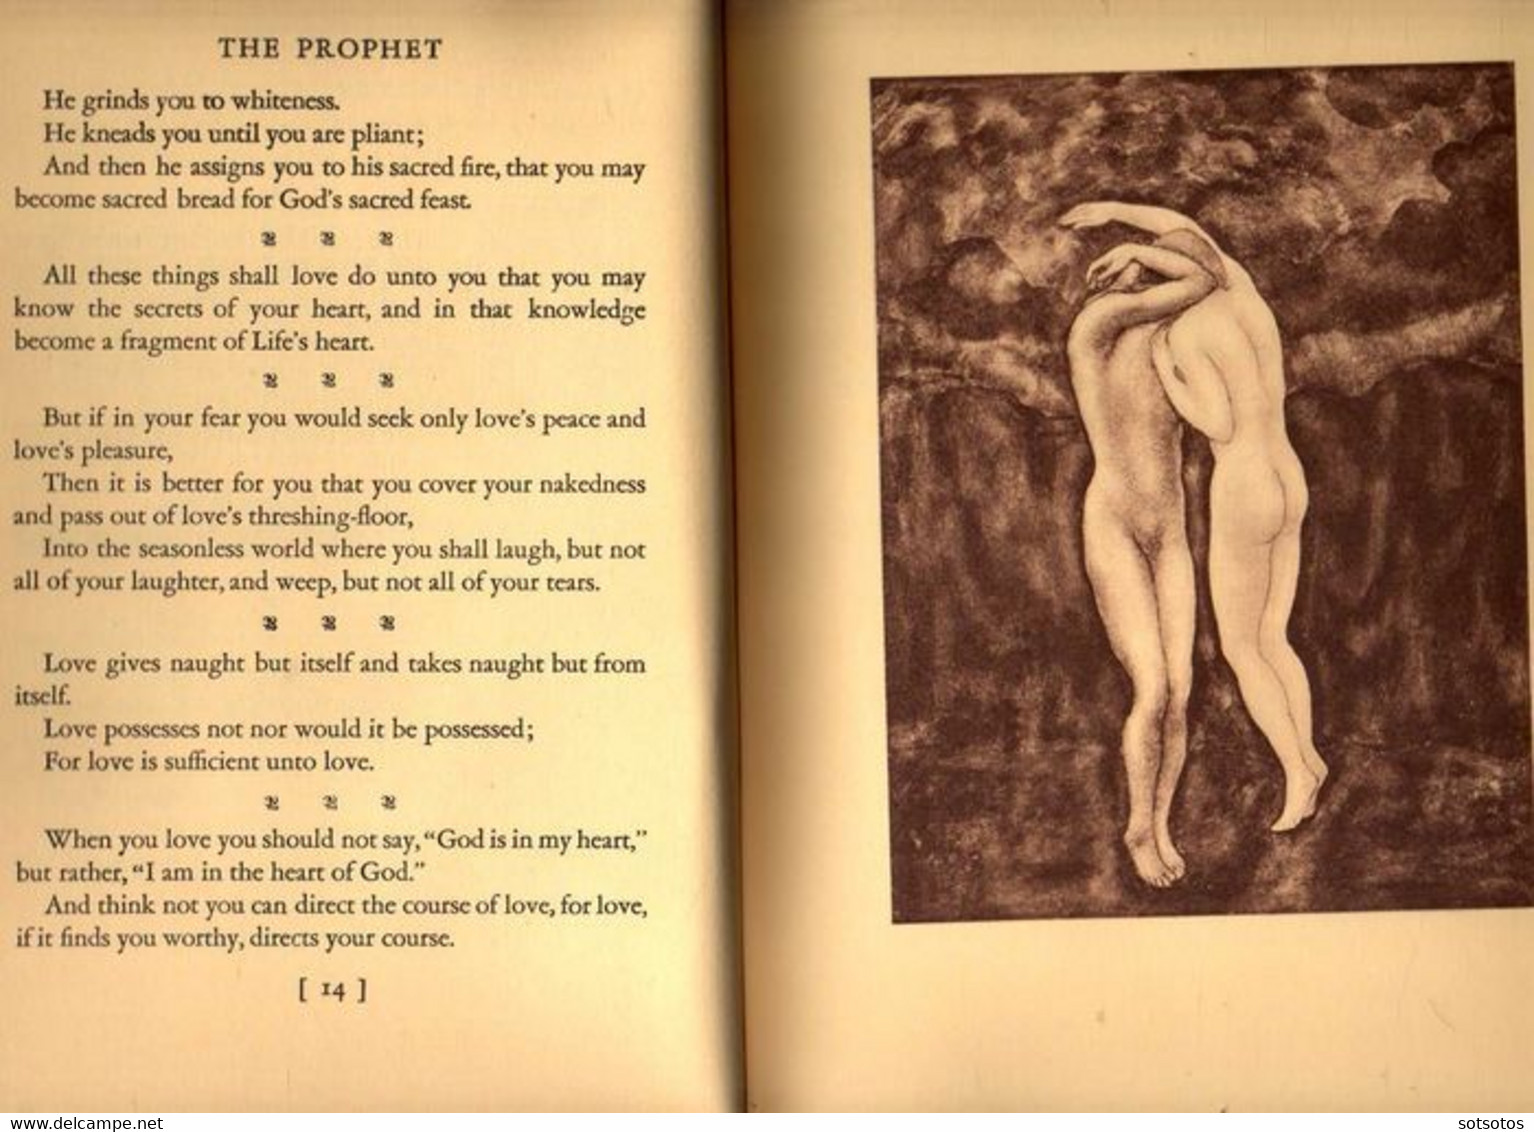 The Prophet by Kahlil Gibran -  this is a Borzoi book, published by Alfred Knopf Inc.manufactured in USA   Hardbound